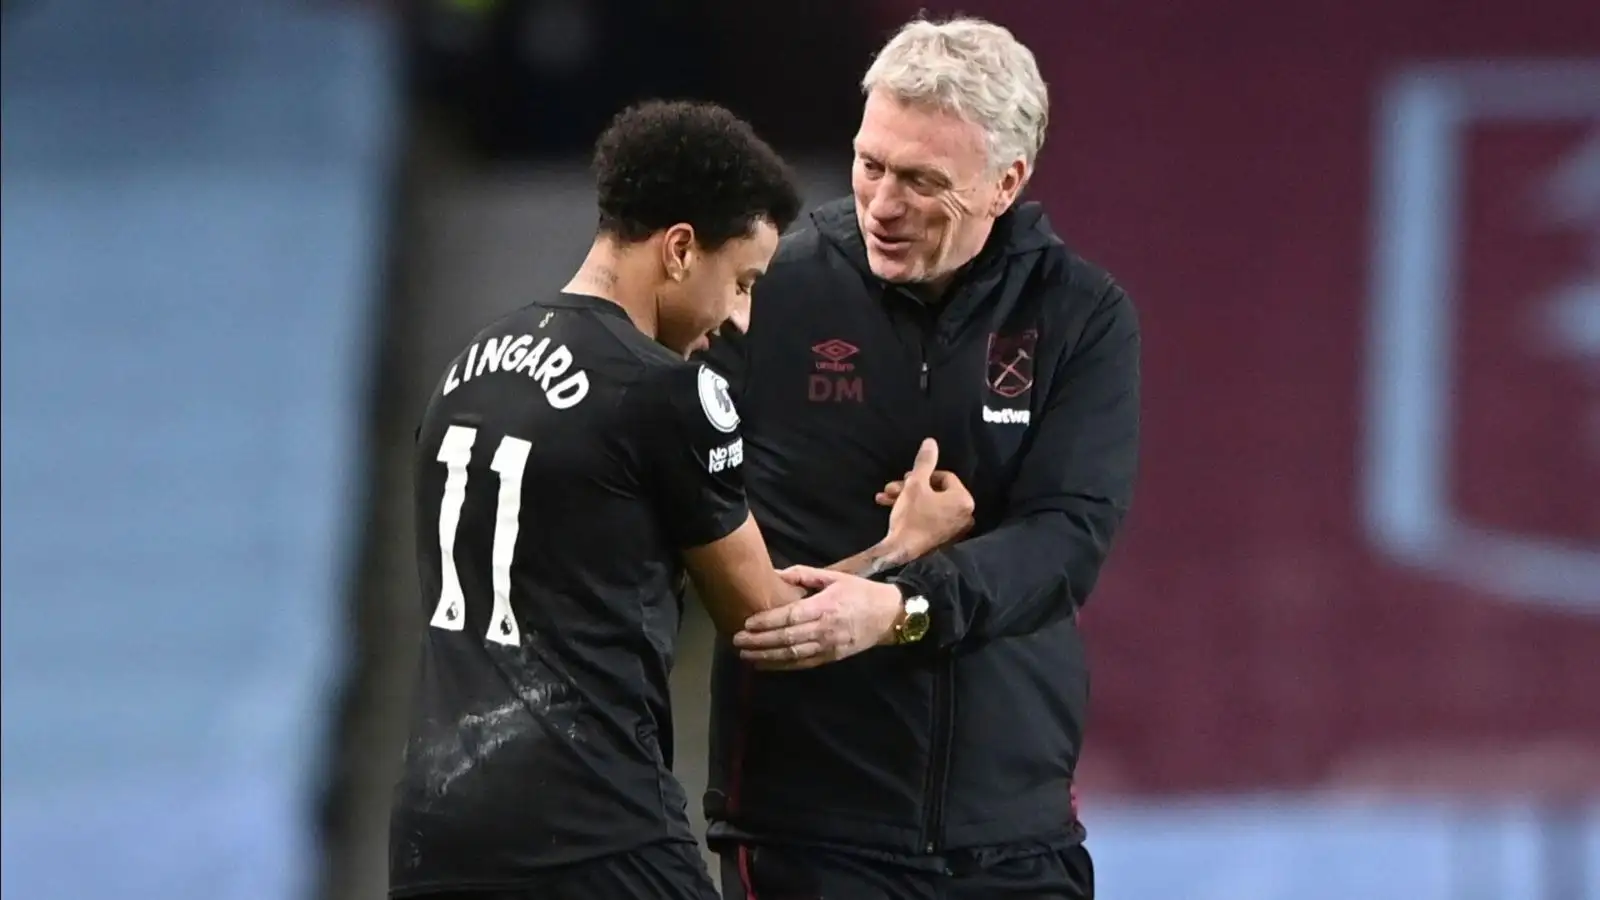 David Moyes with Jesse Lingard after a win.